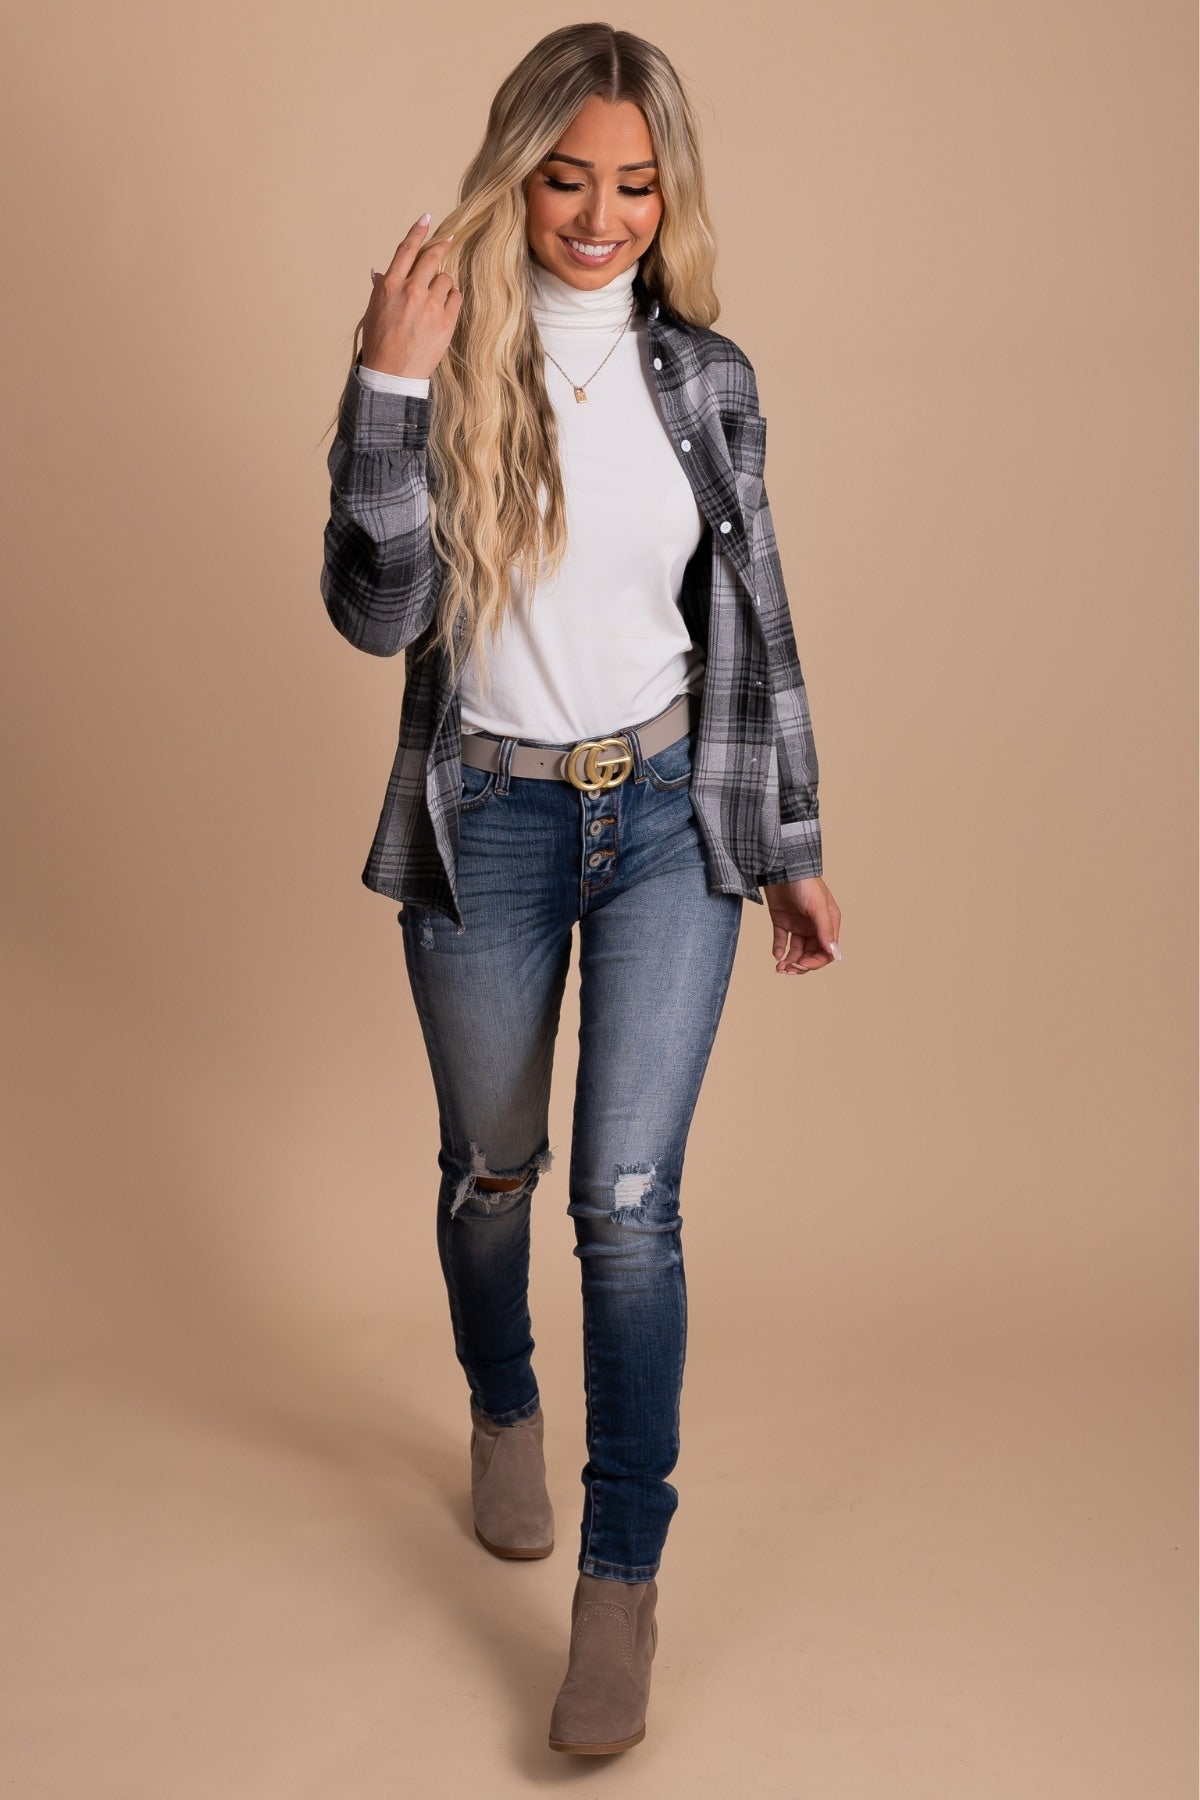 Fall outfit with long sleeve plaid button-up shirt jacket